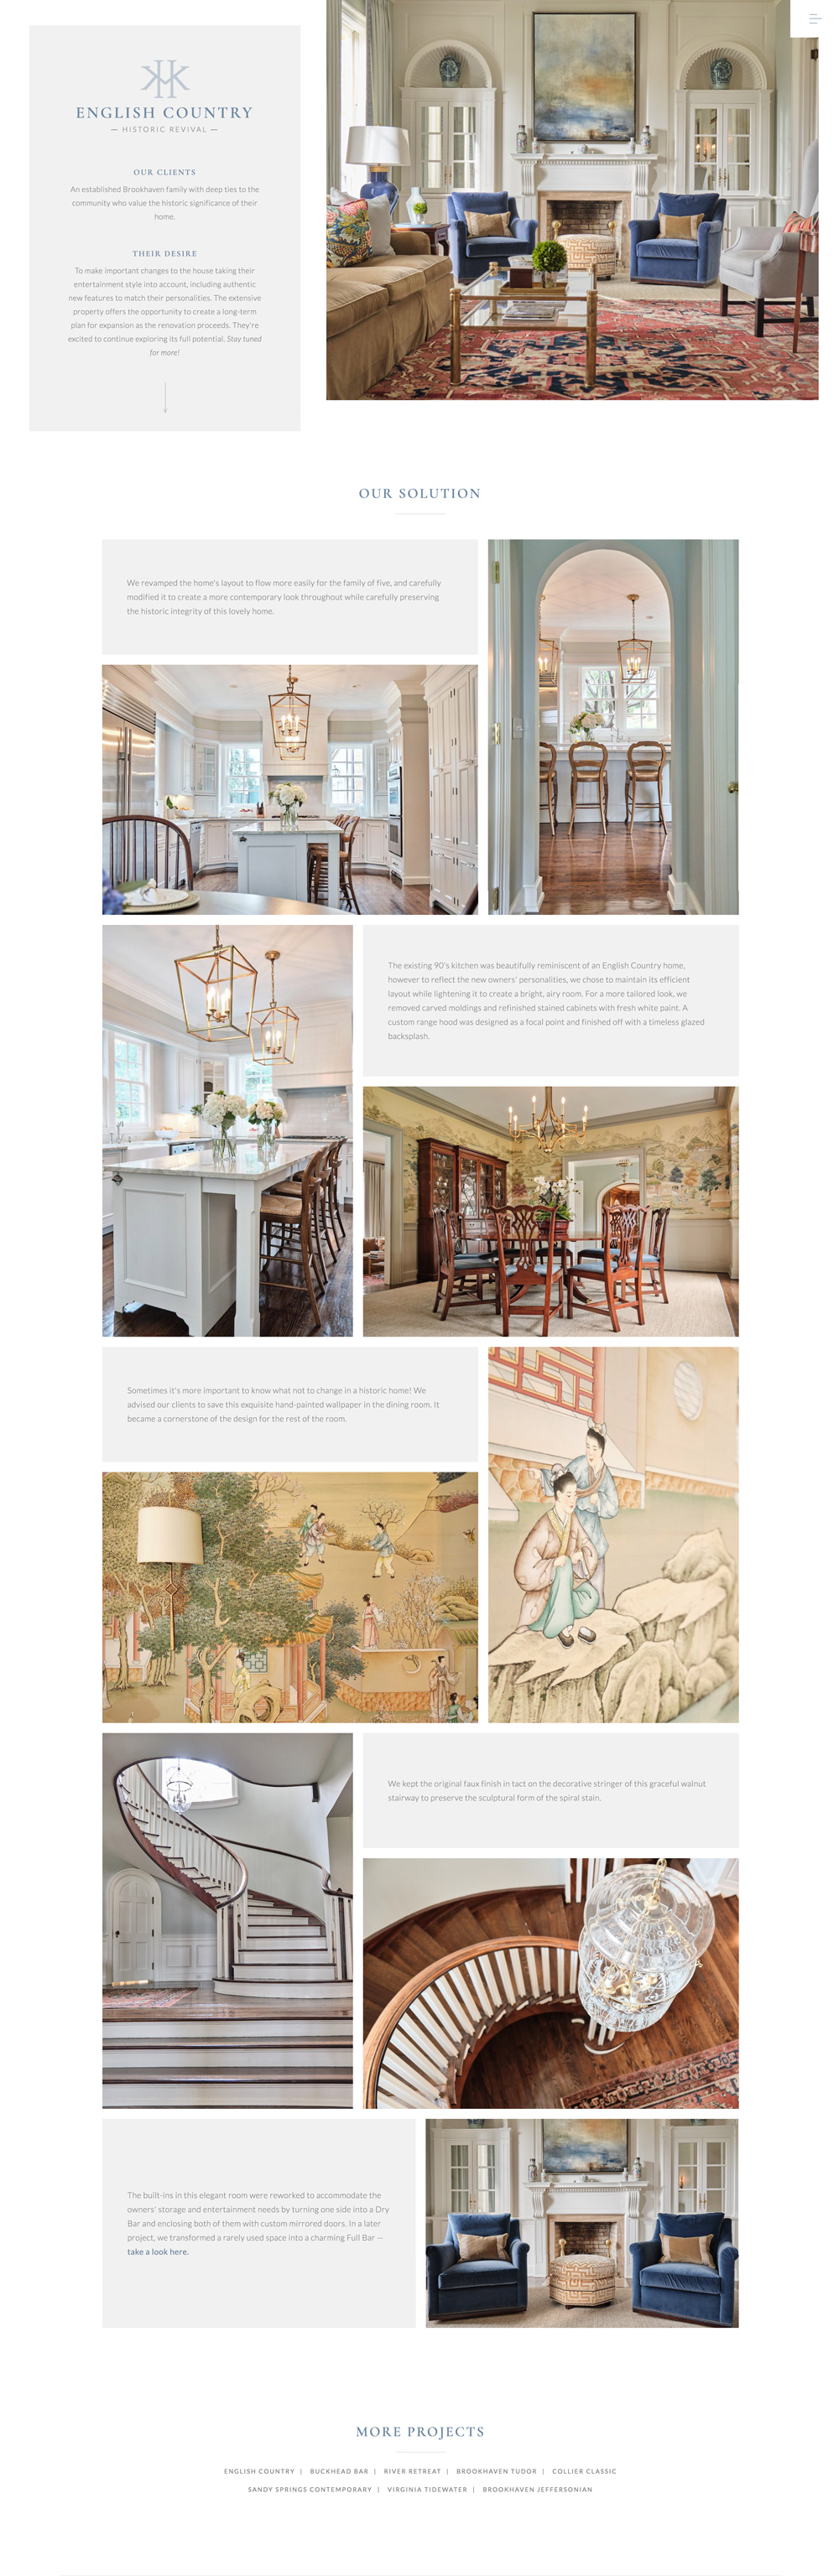 KVH Design project page for english country historic revival design